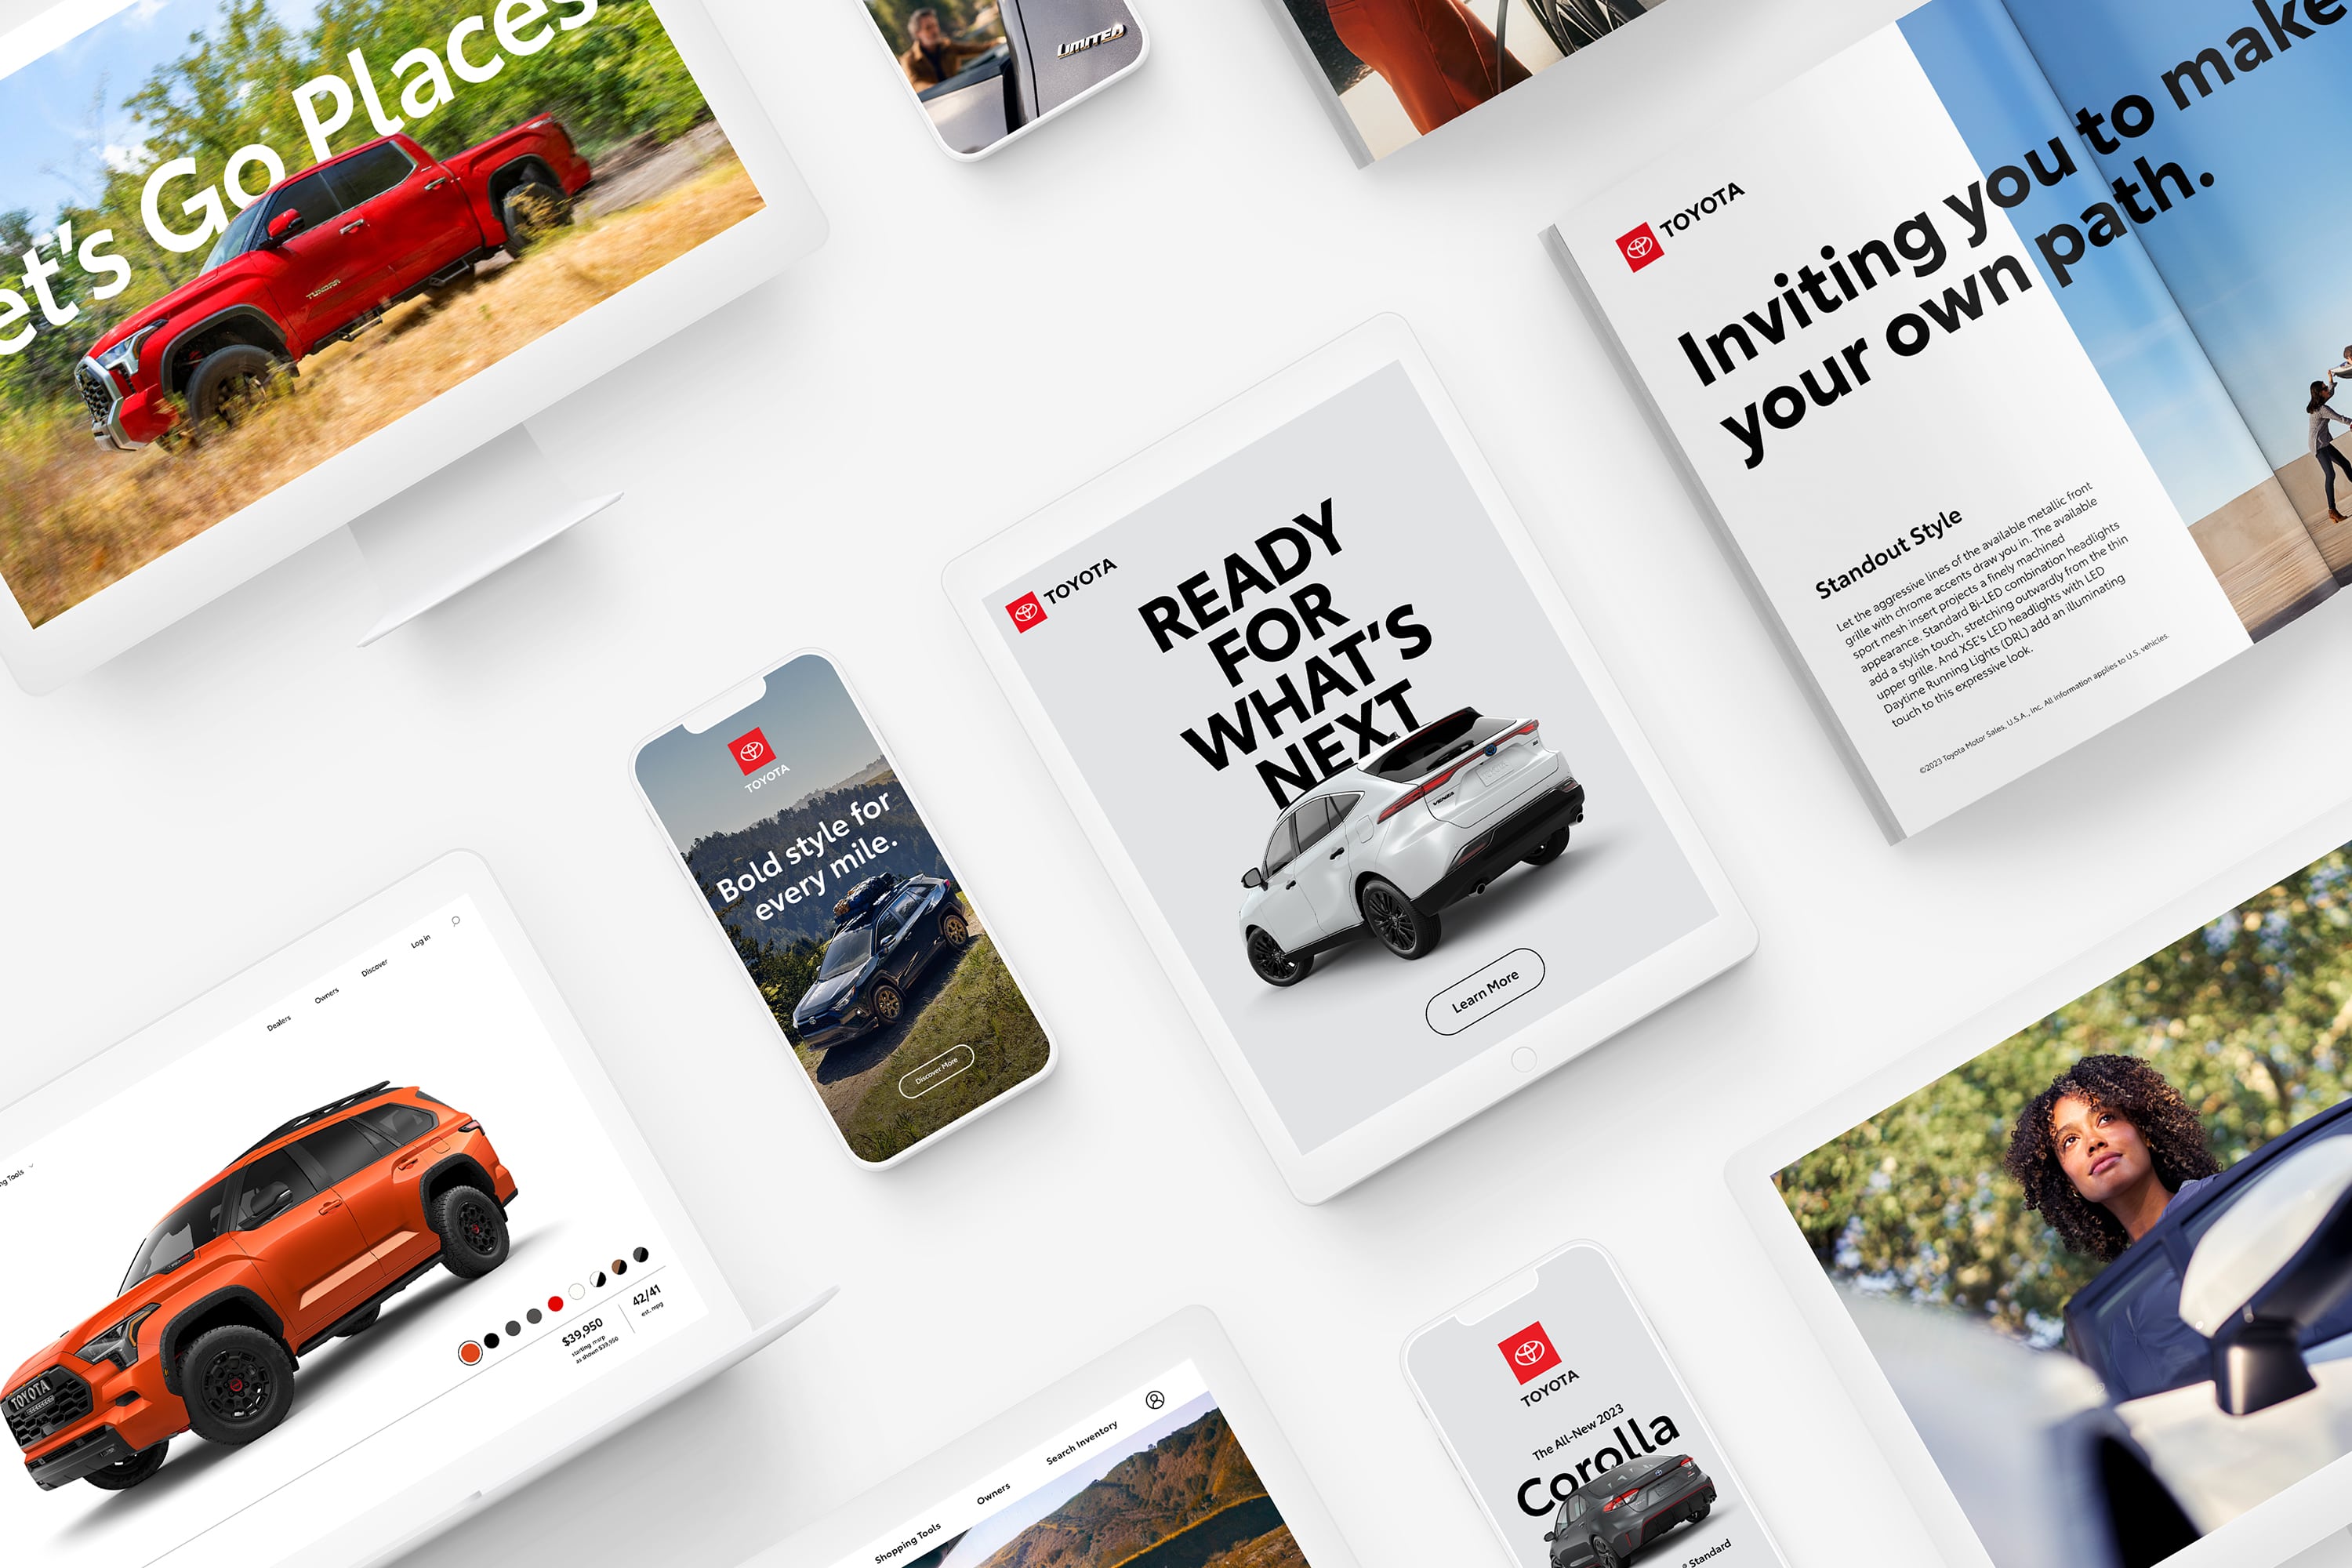 An iPhone, iPad and magazine display images of different Toyota ads and website pages.